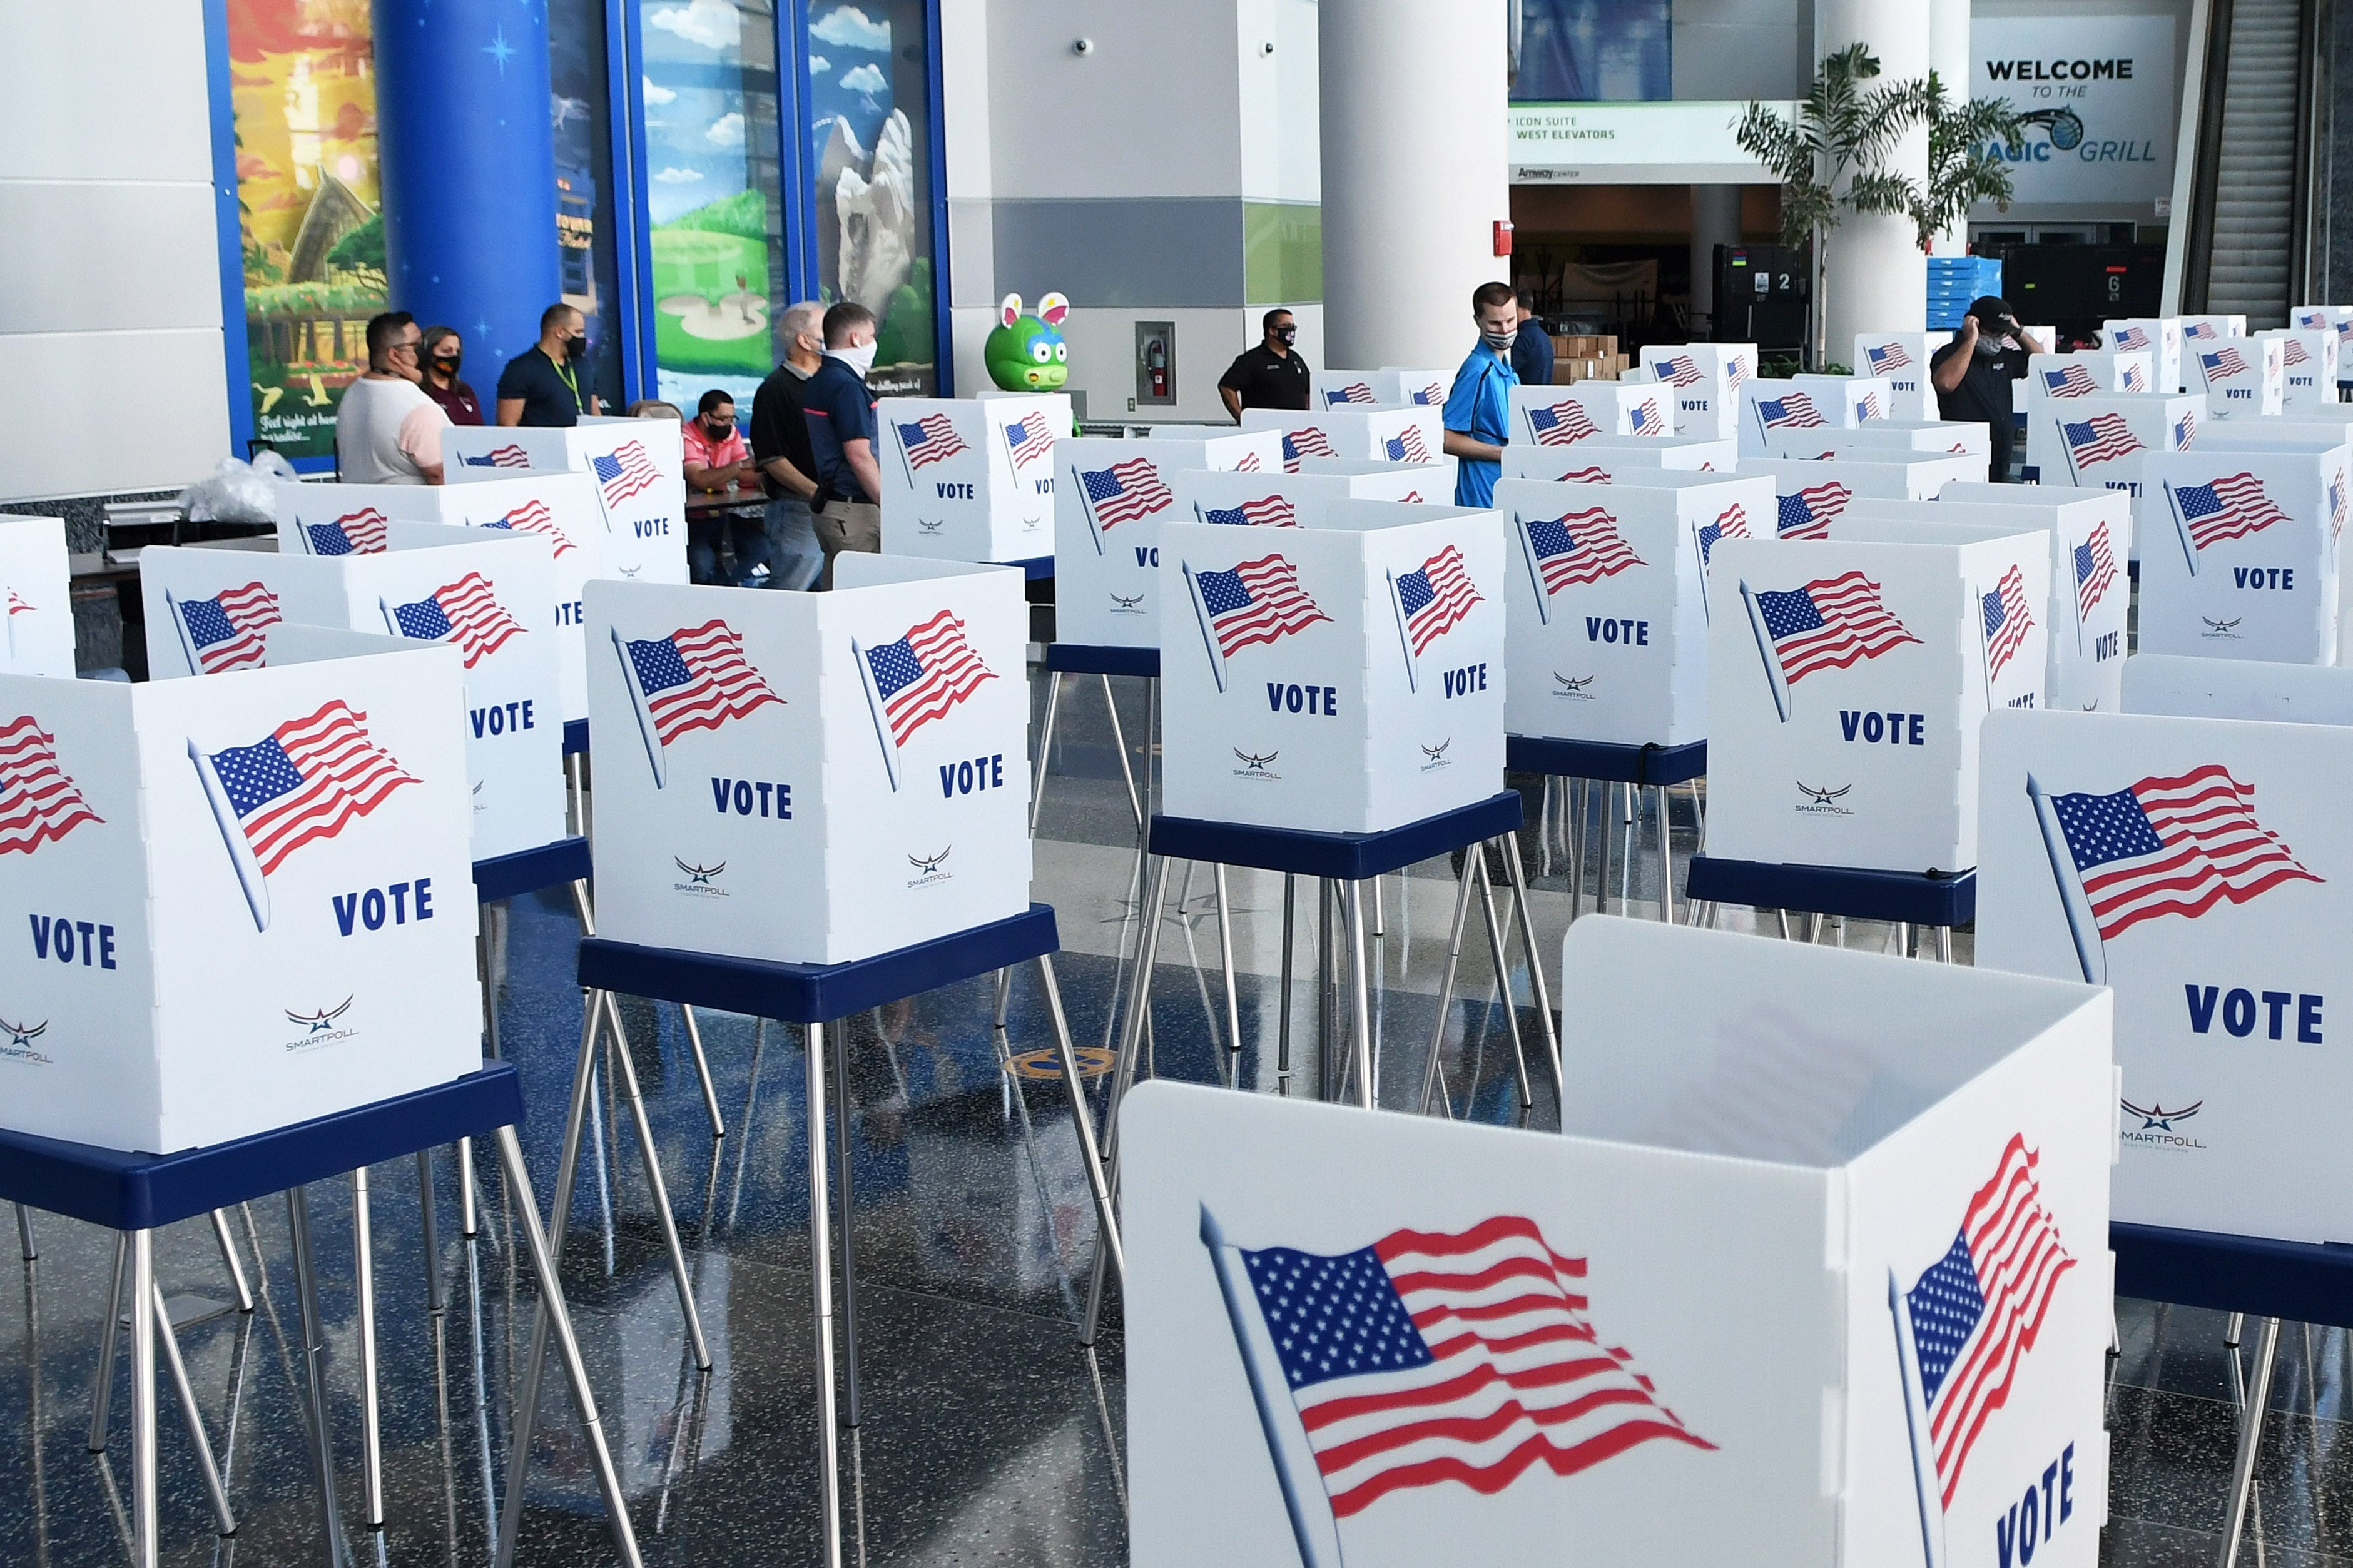 Election workers set up voting booths at the Amway Center, the home arena of the Orlando Magic, on Oct. 15, 2020.